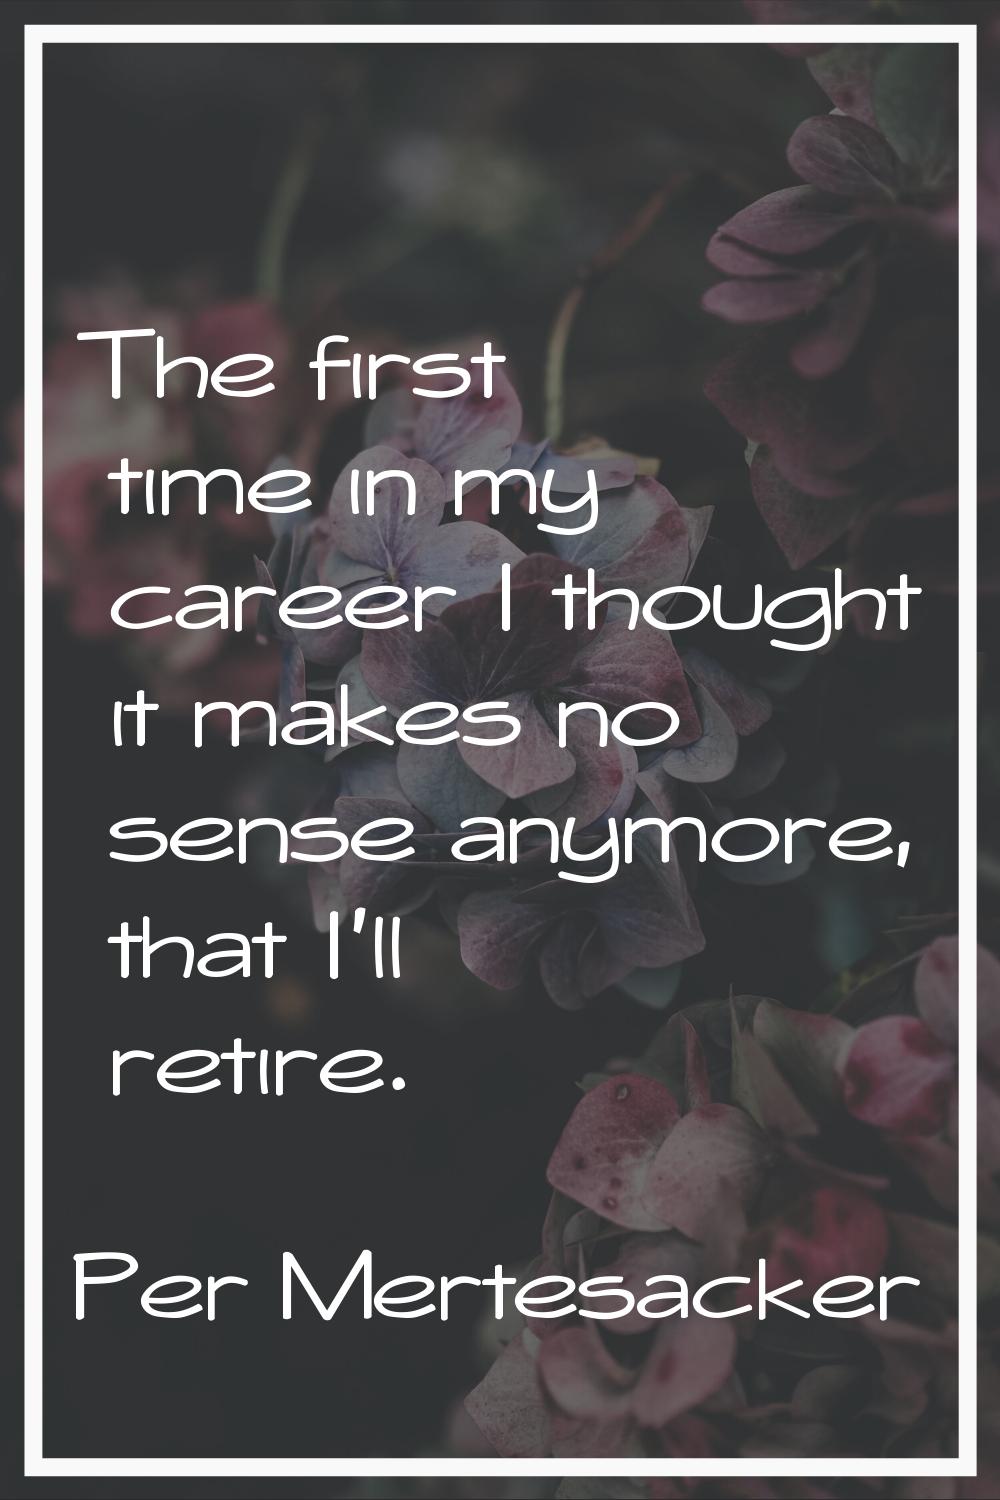 The first time in my career I thought it makes no sense anymore, that I'll retire.